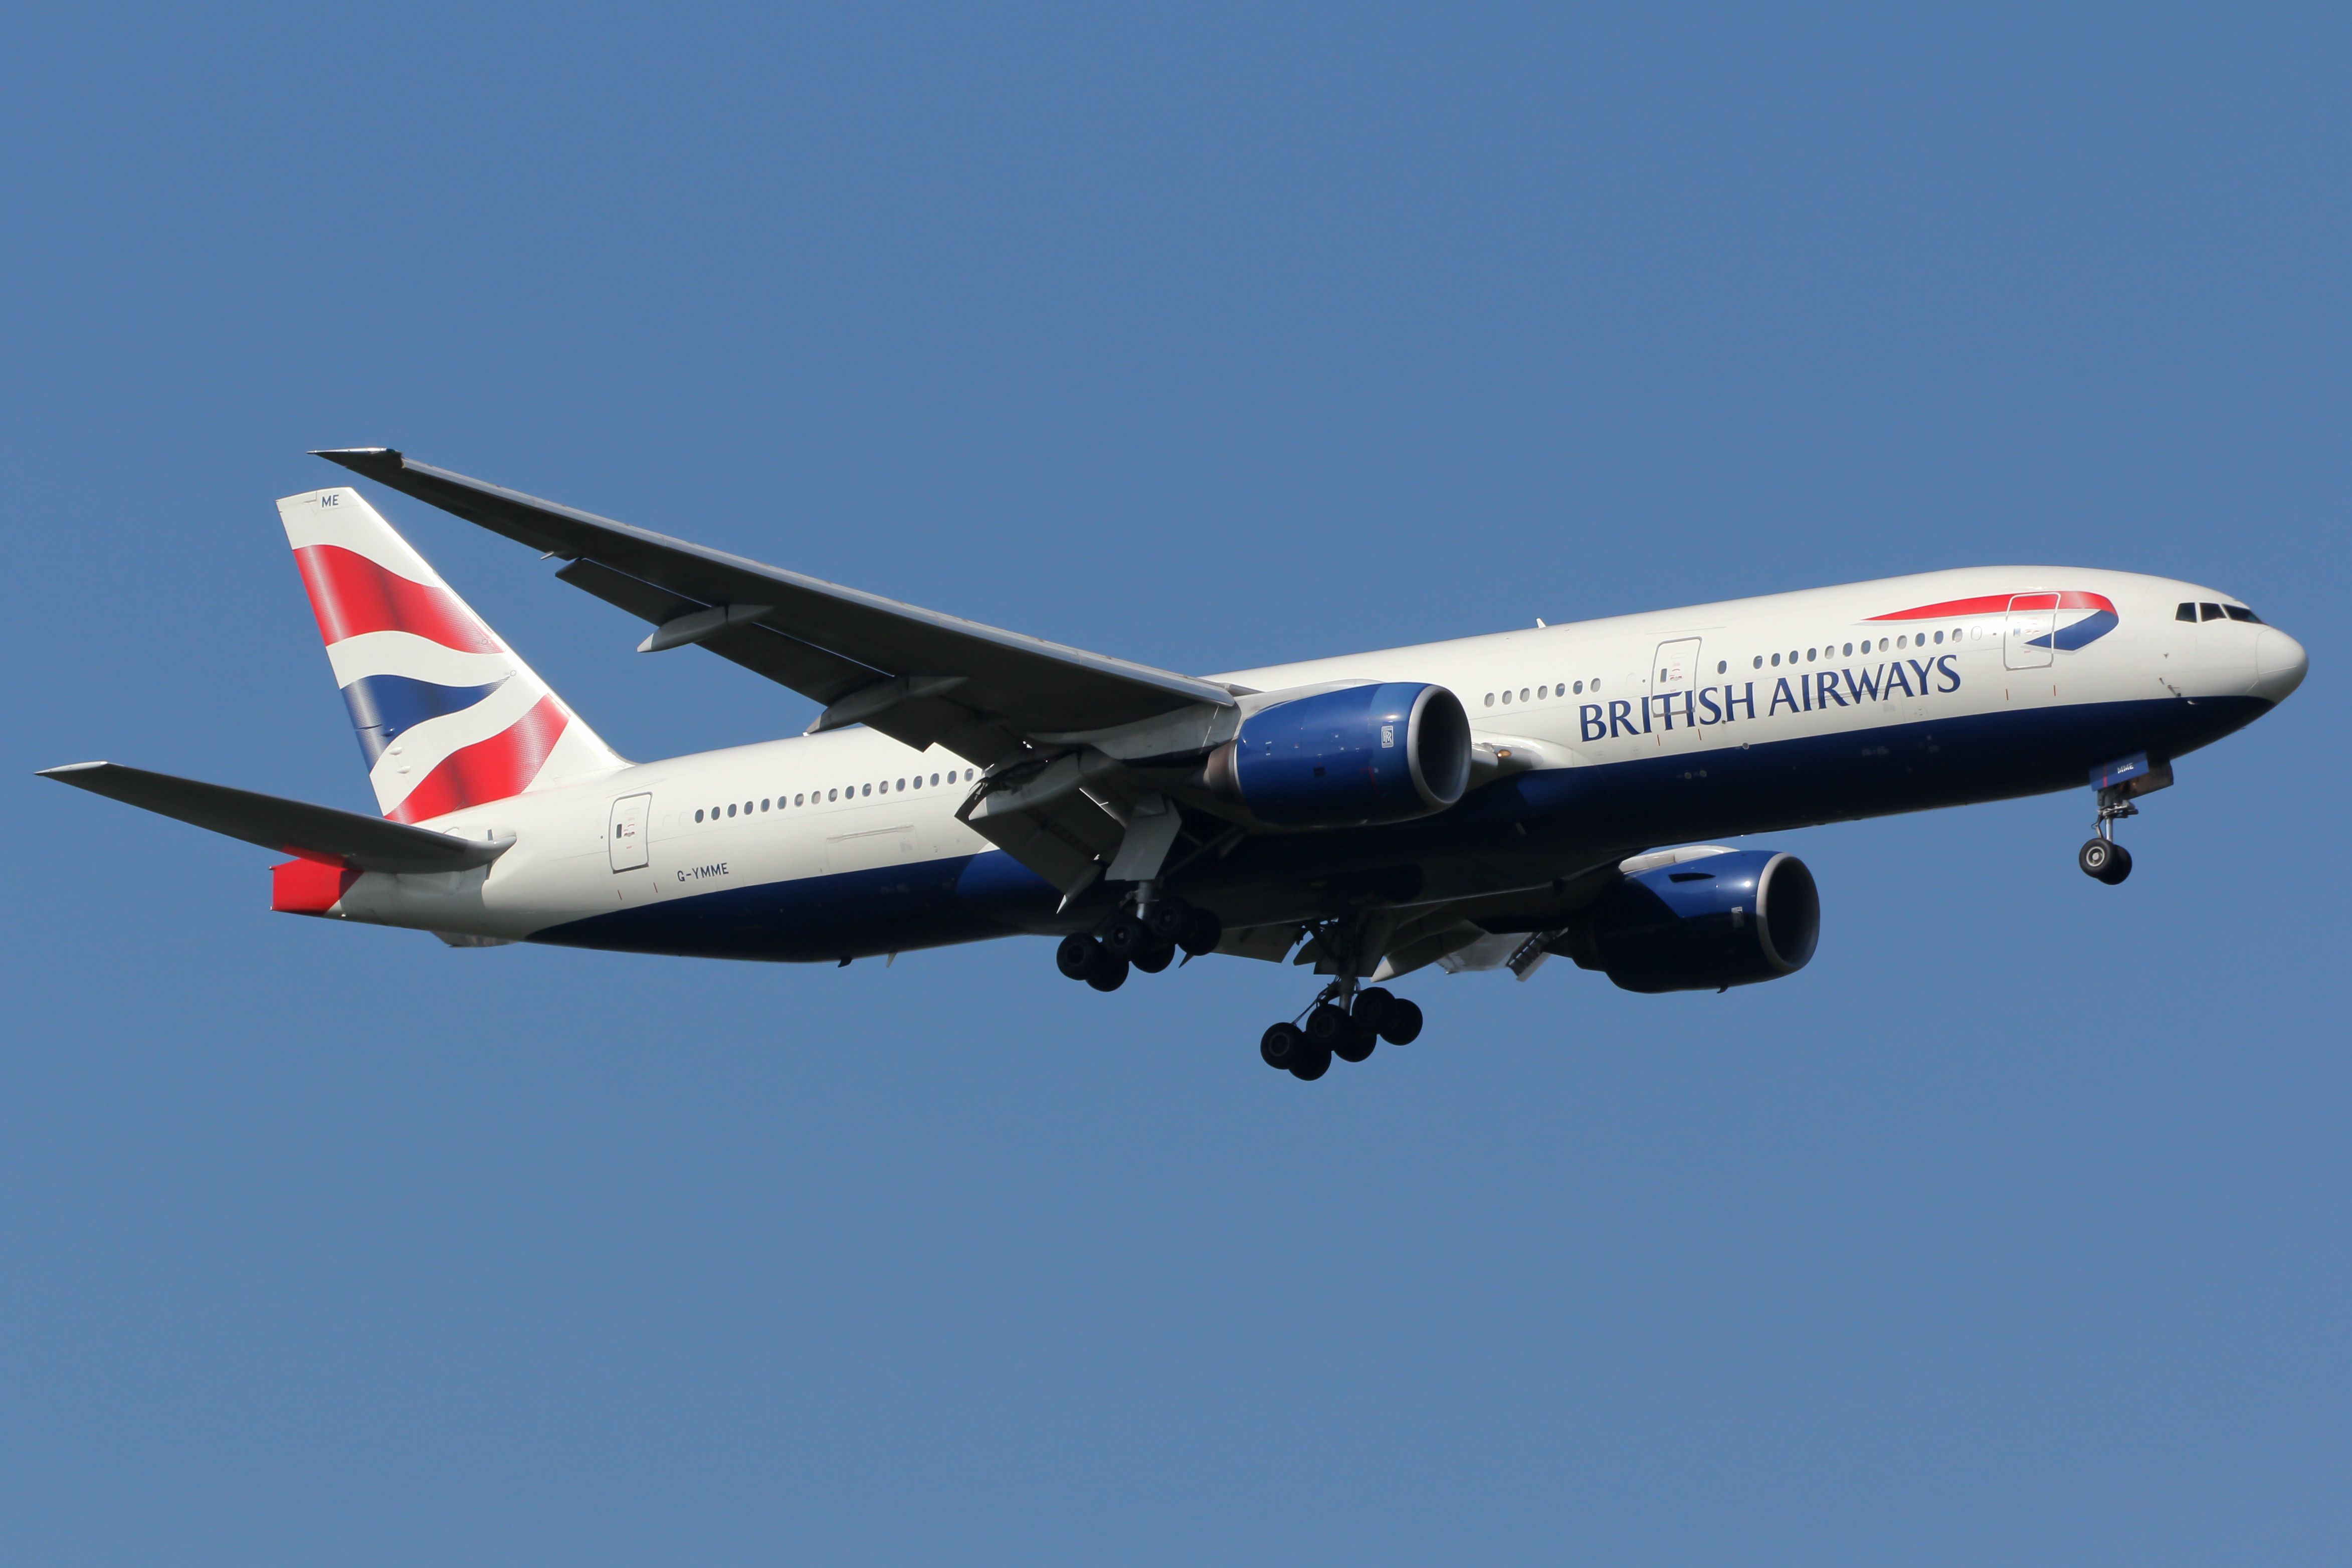 A British Airways Boeing 777-200 flying in the sky.